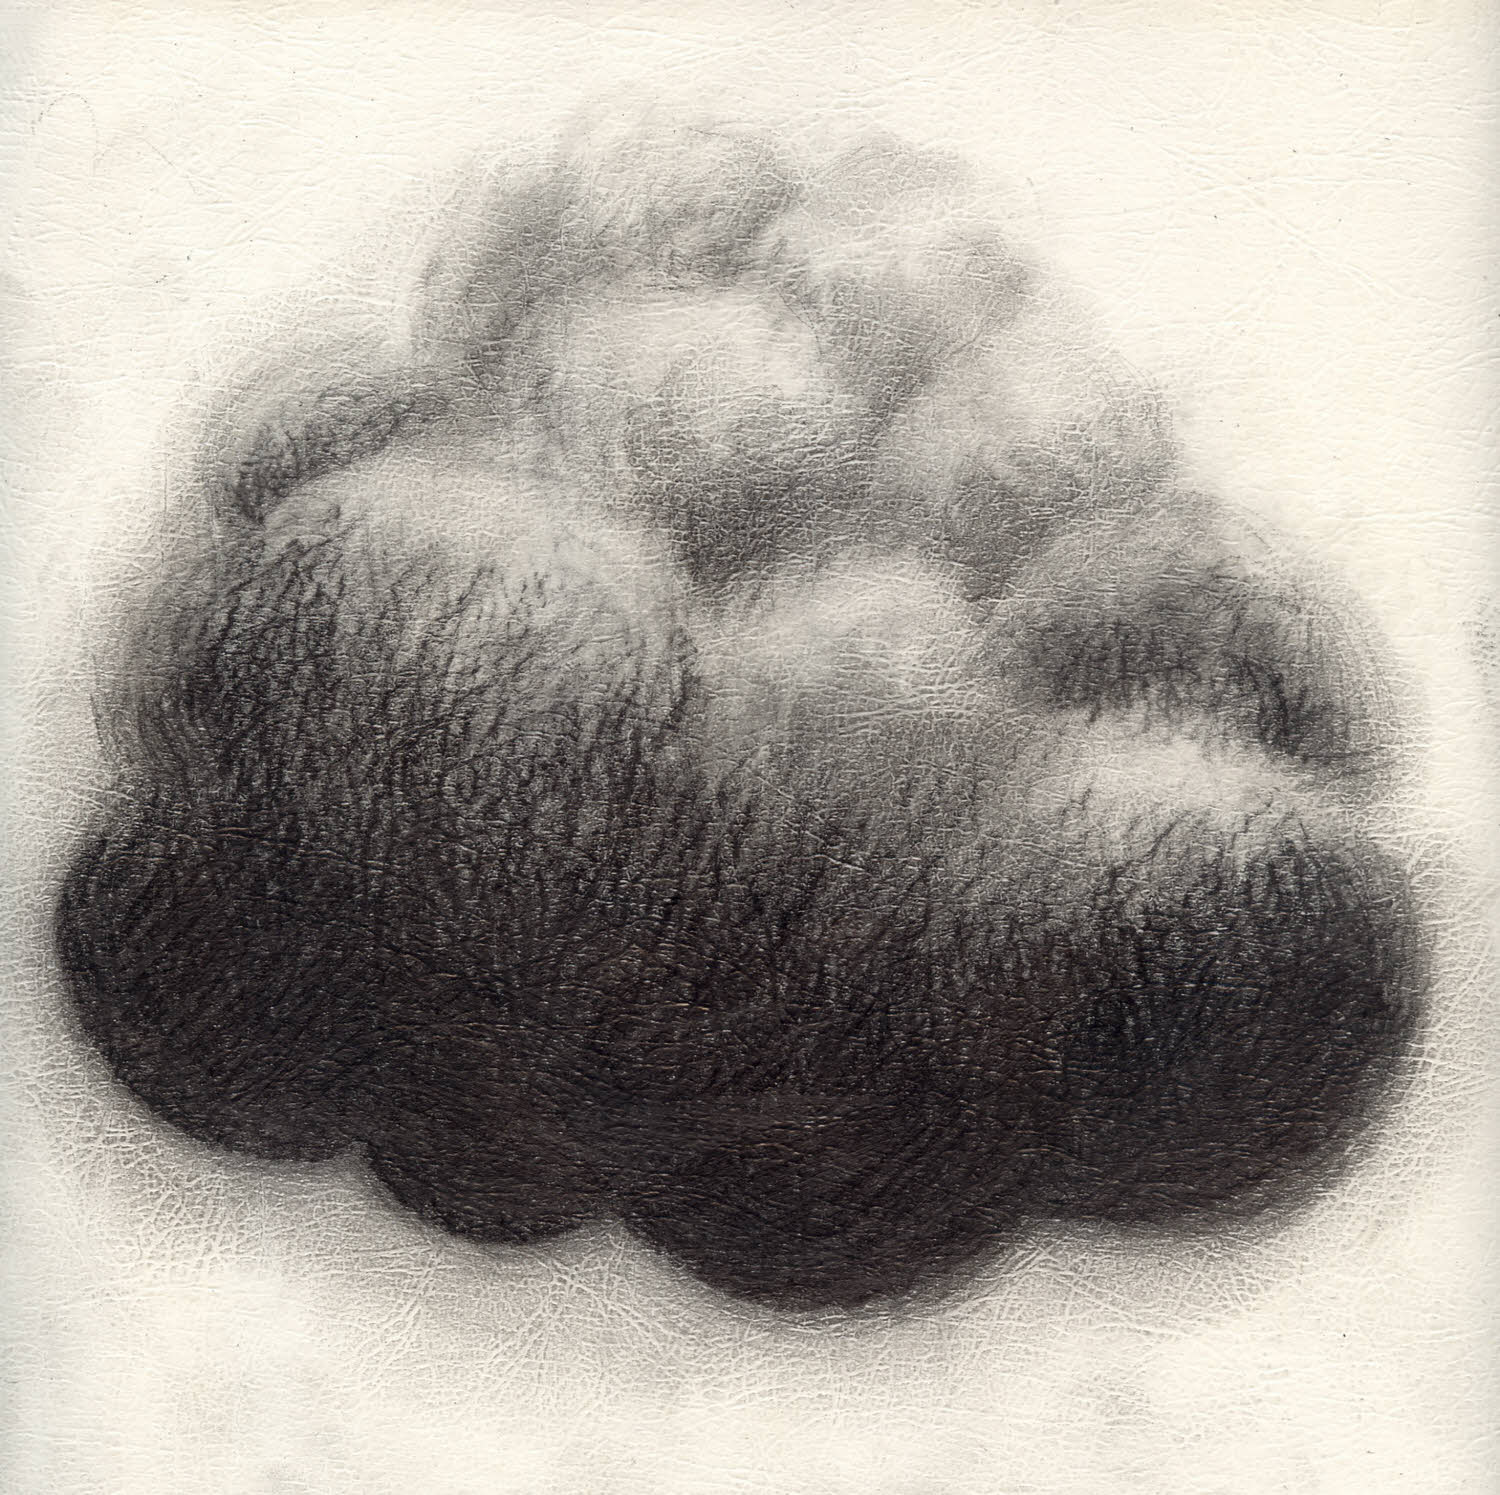 Confuse, 2005, graphite on texture paper, 7.5x7.5 inches